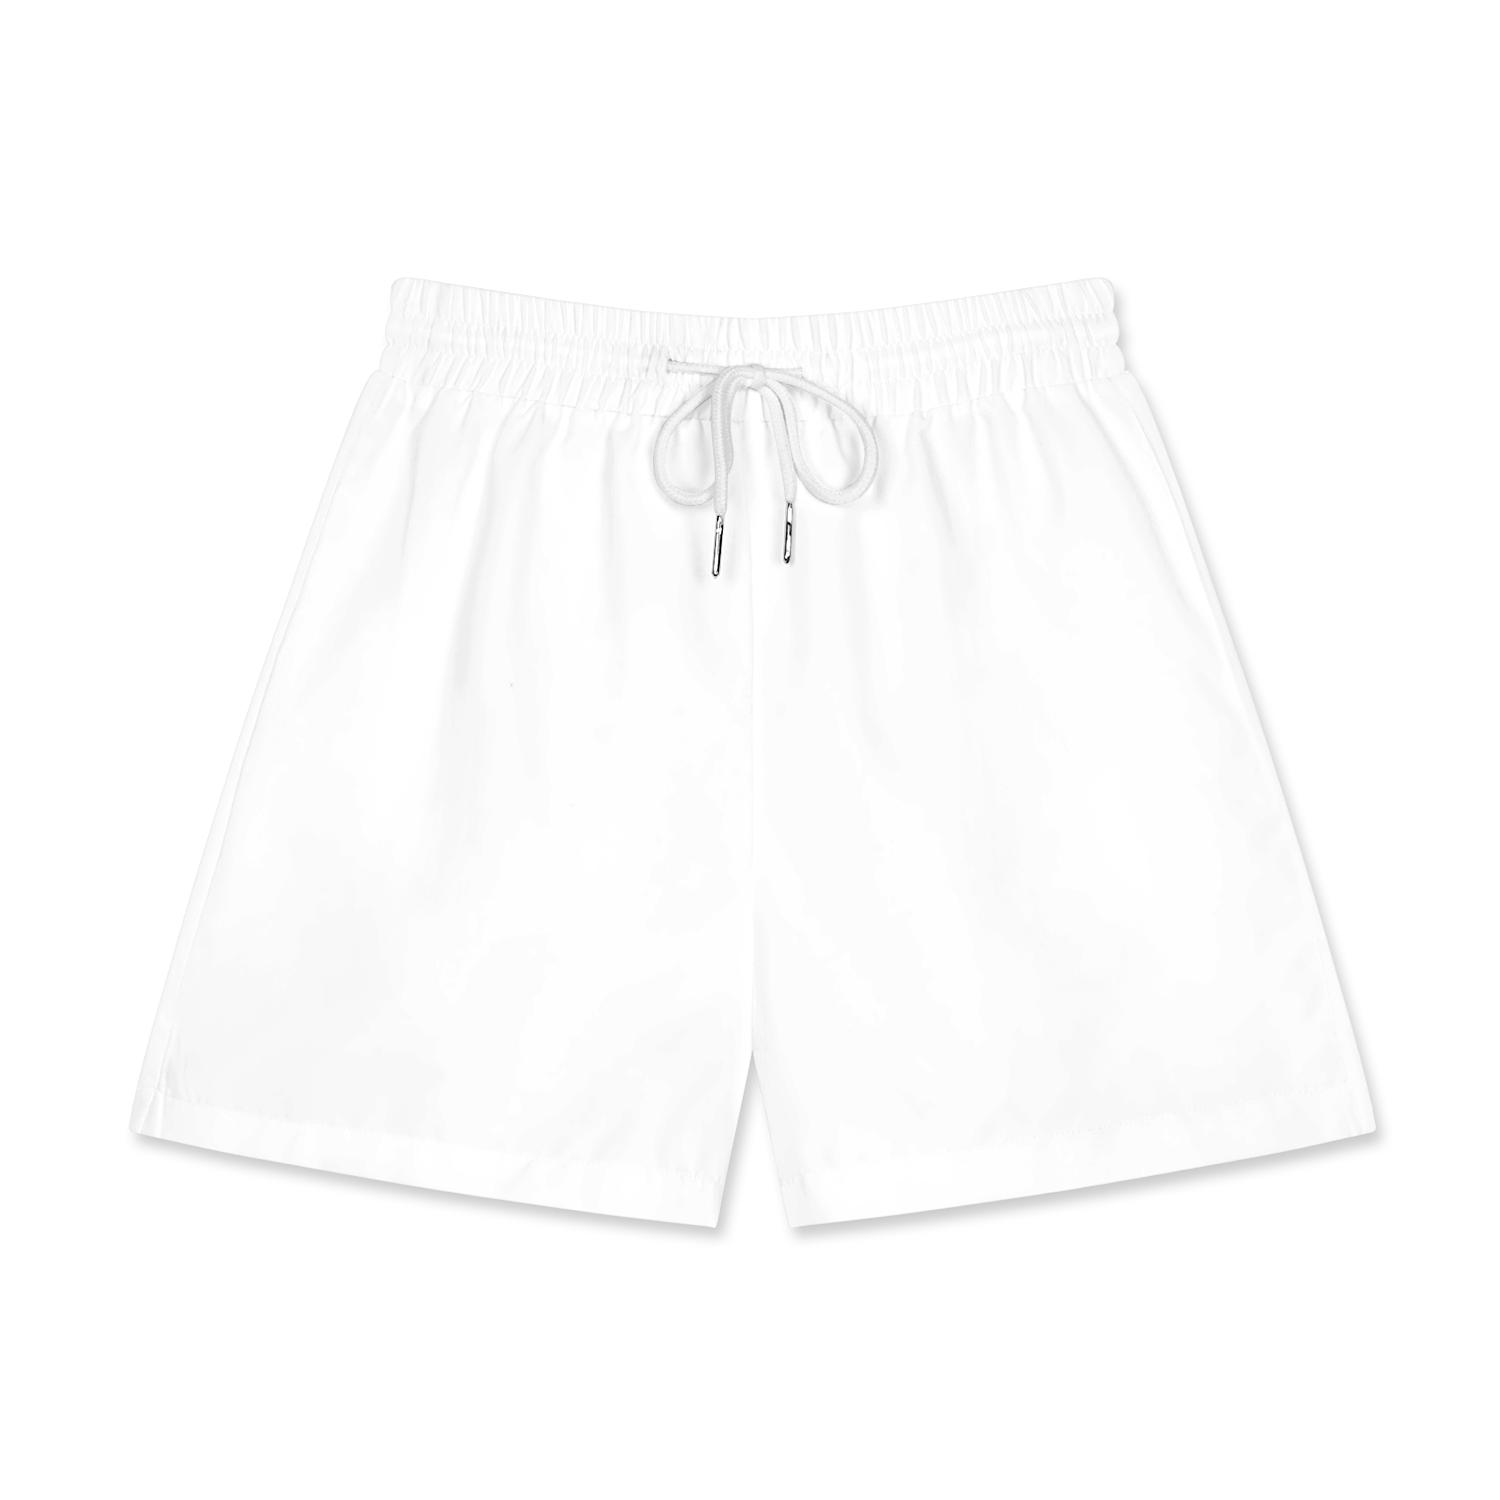 All-Over Print Women's Athletic Shorts | HugePOD-2